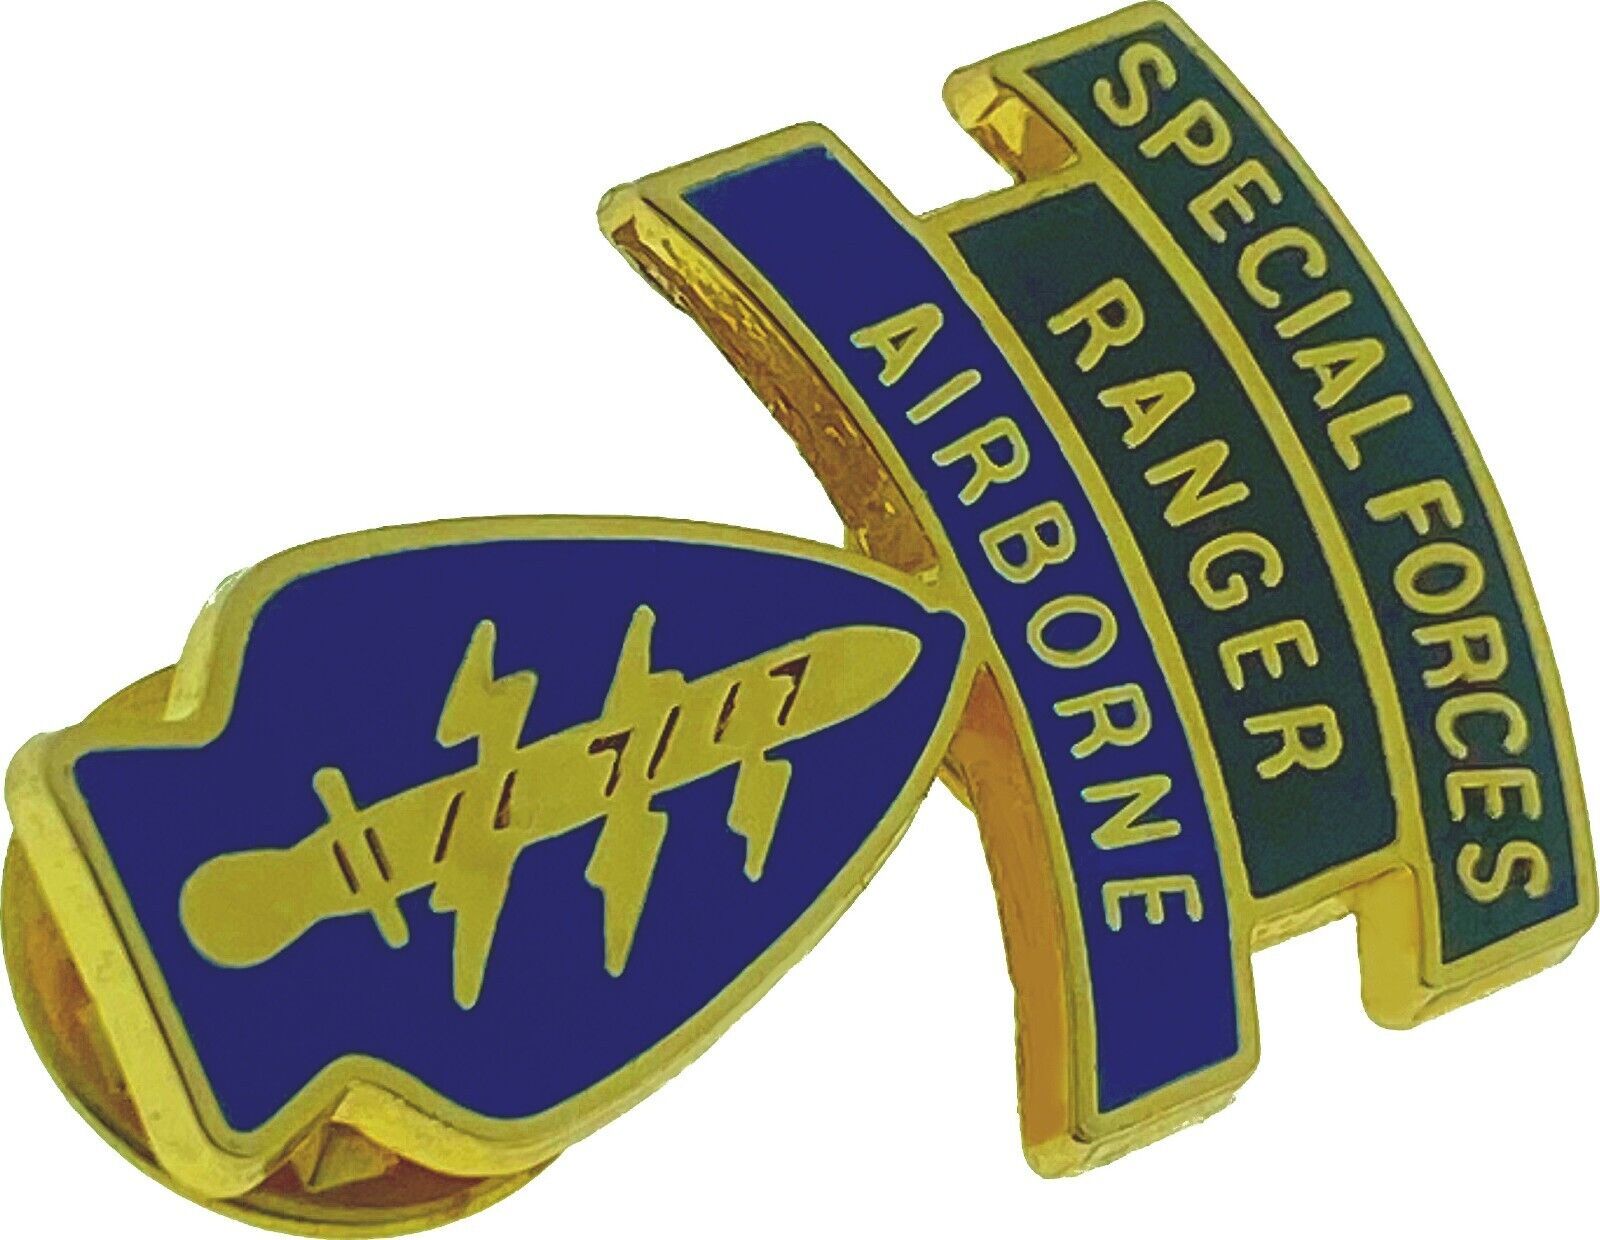 US ARMY SPECIAL FORCES RANGER AIRBORNE LAPEL PIN BADGE 7/8 x 1.2 INCHES